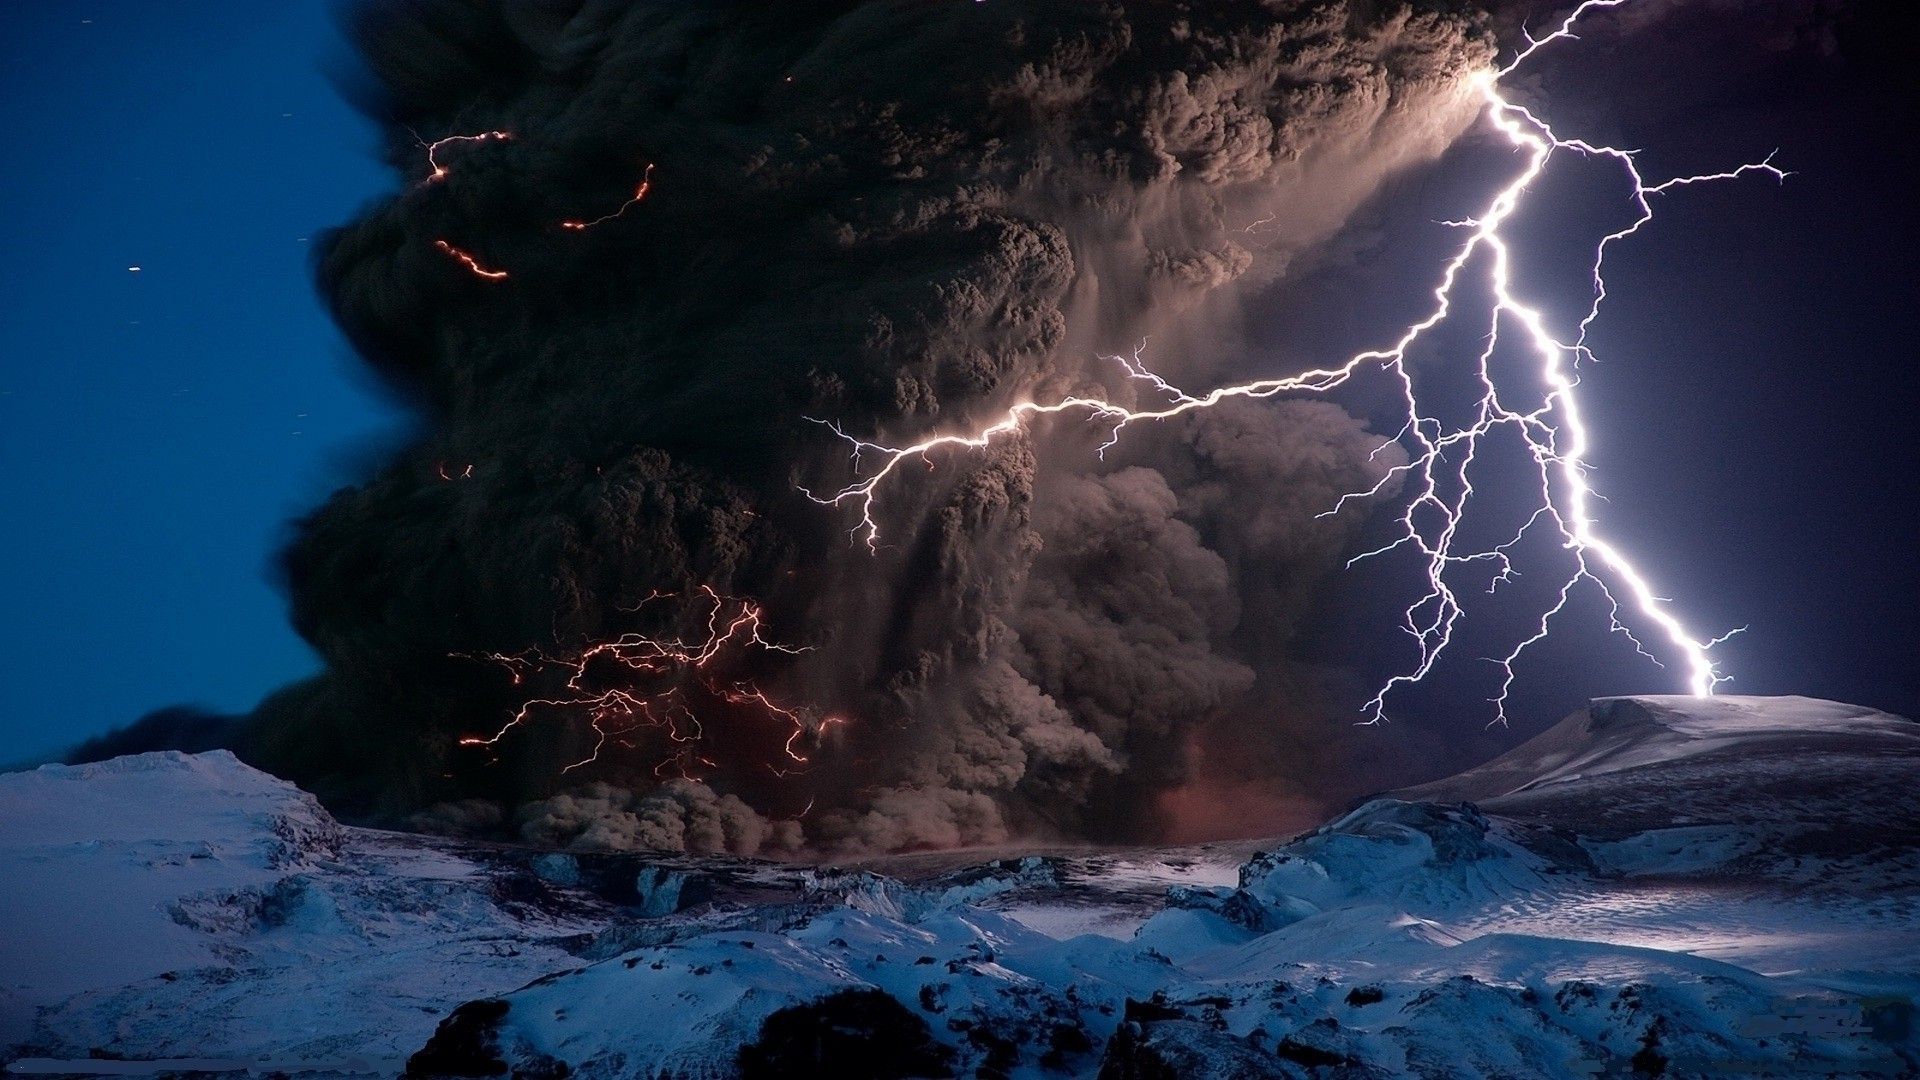 A massive volcanic eruption spews ash and smoke into the air, accompanied by a bolt of lightning. - Storm